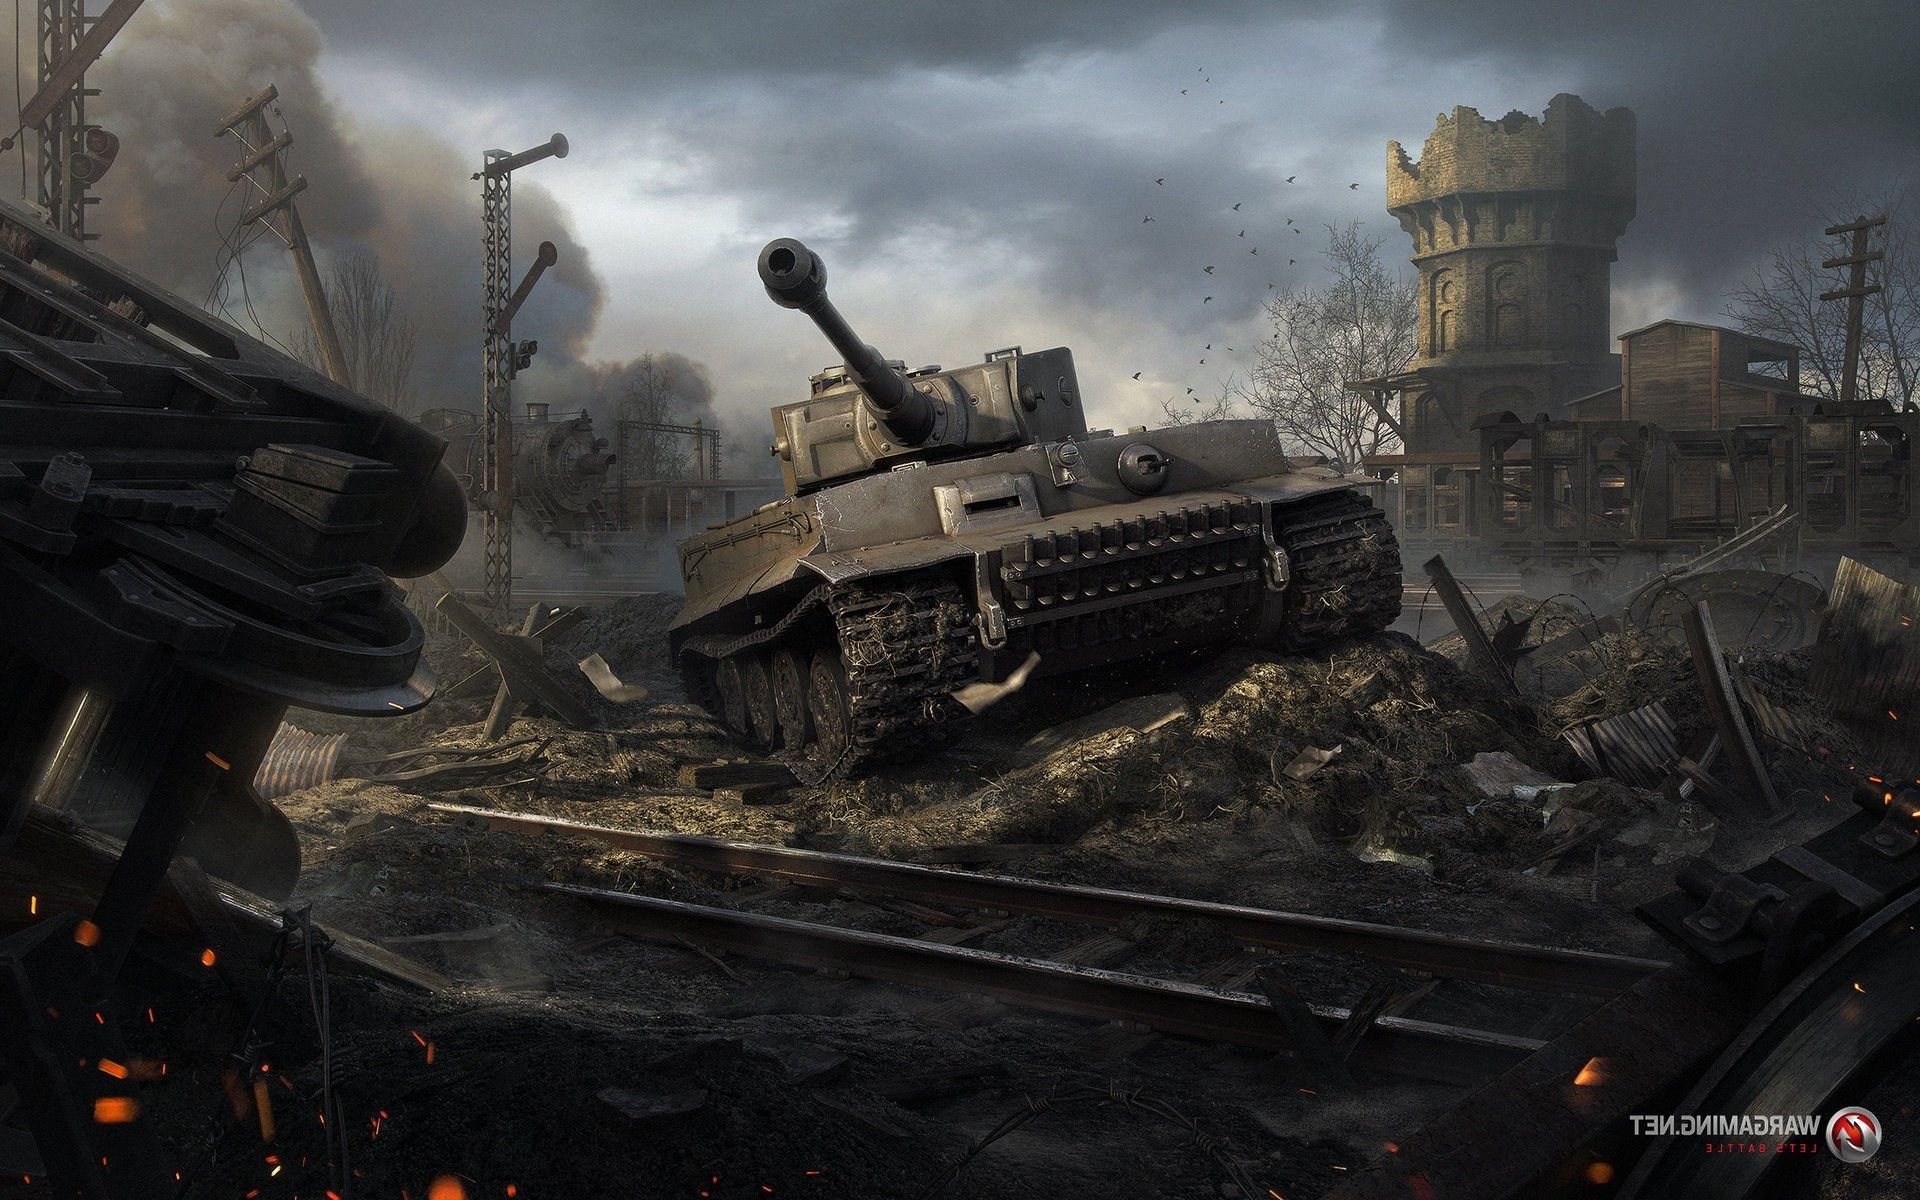 World Of Tanks Tiger Wallpaper p Other Wallpaper. Tank wallpaper, World of tanks, World of tanks game